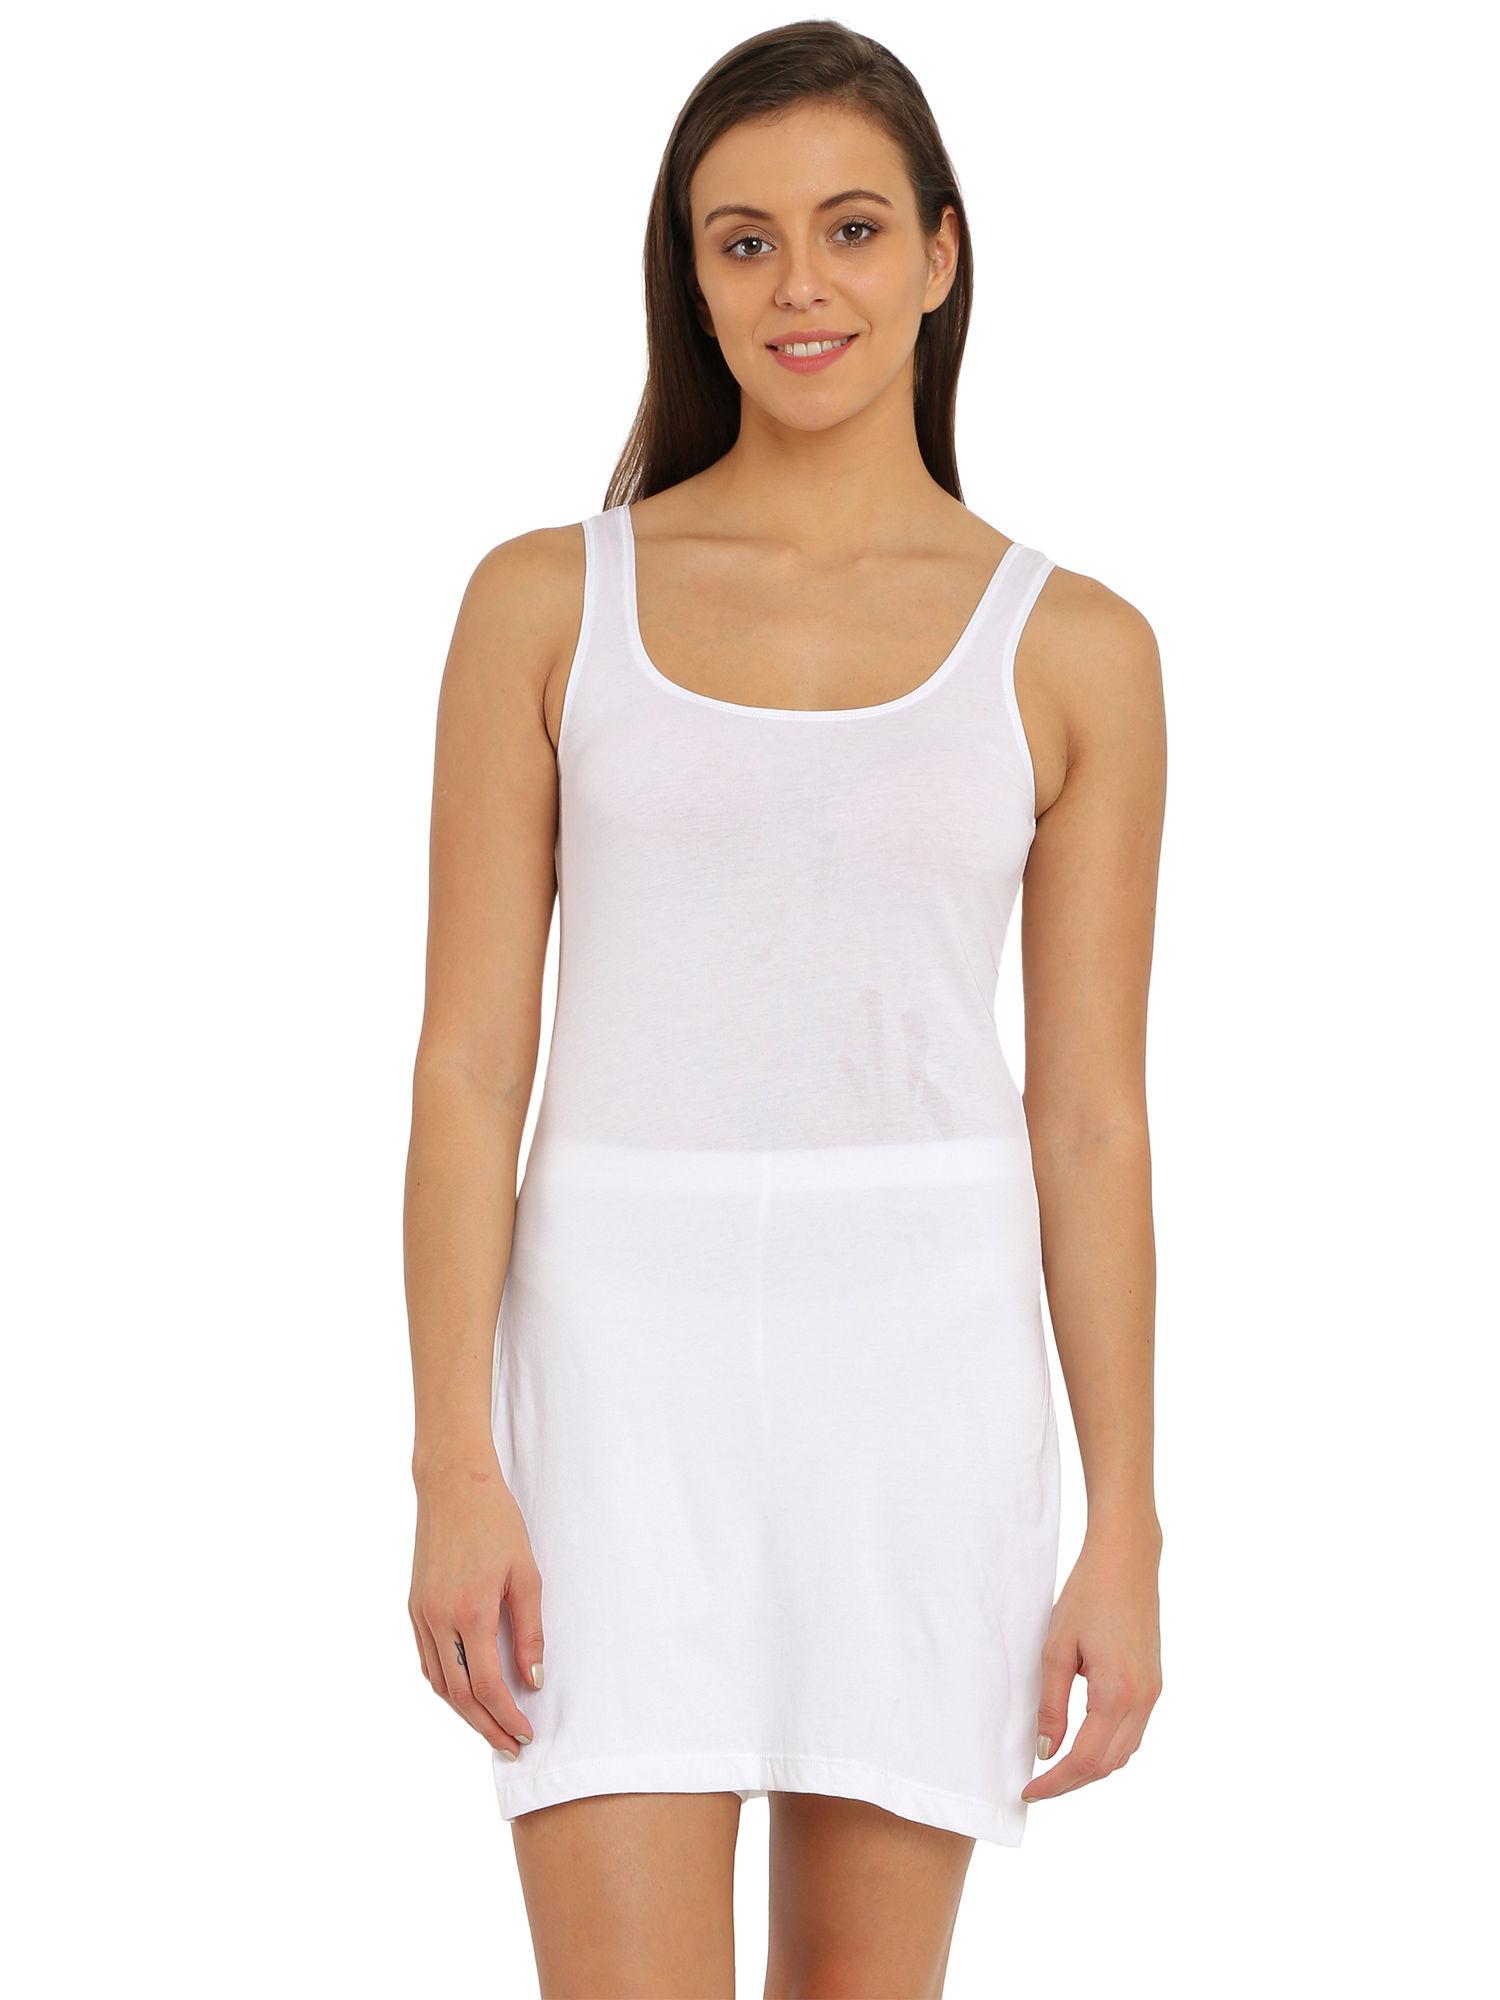 White Long Camisole - Style Number - 1488